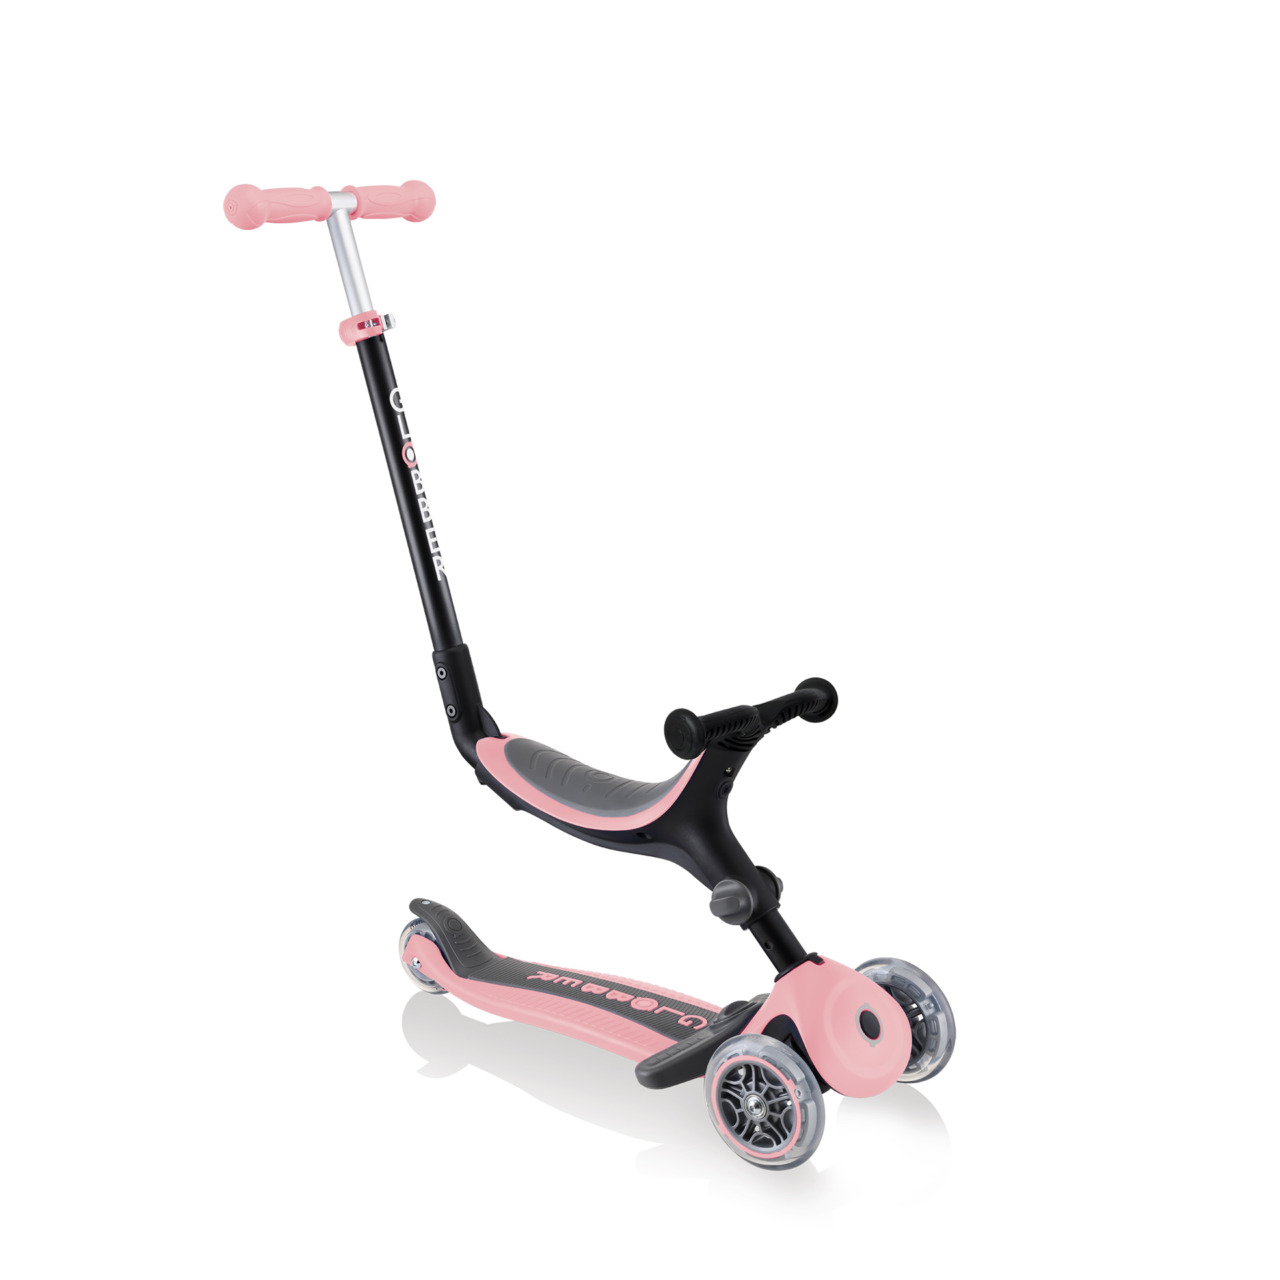 741 210 3 In 1 Scooter For Toddlers